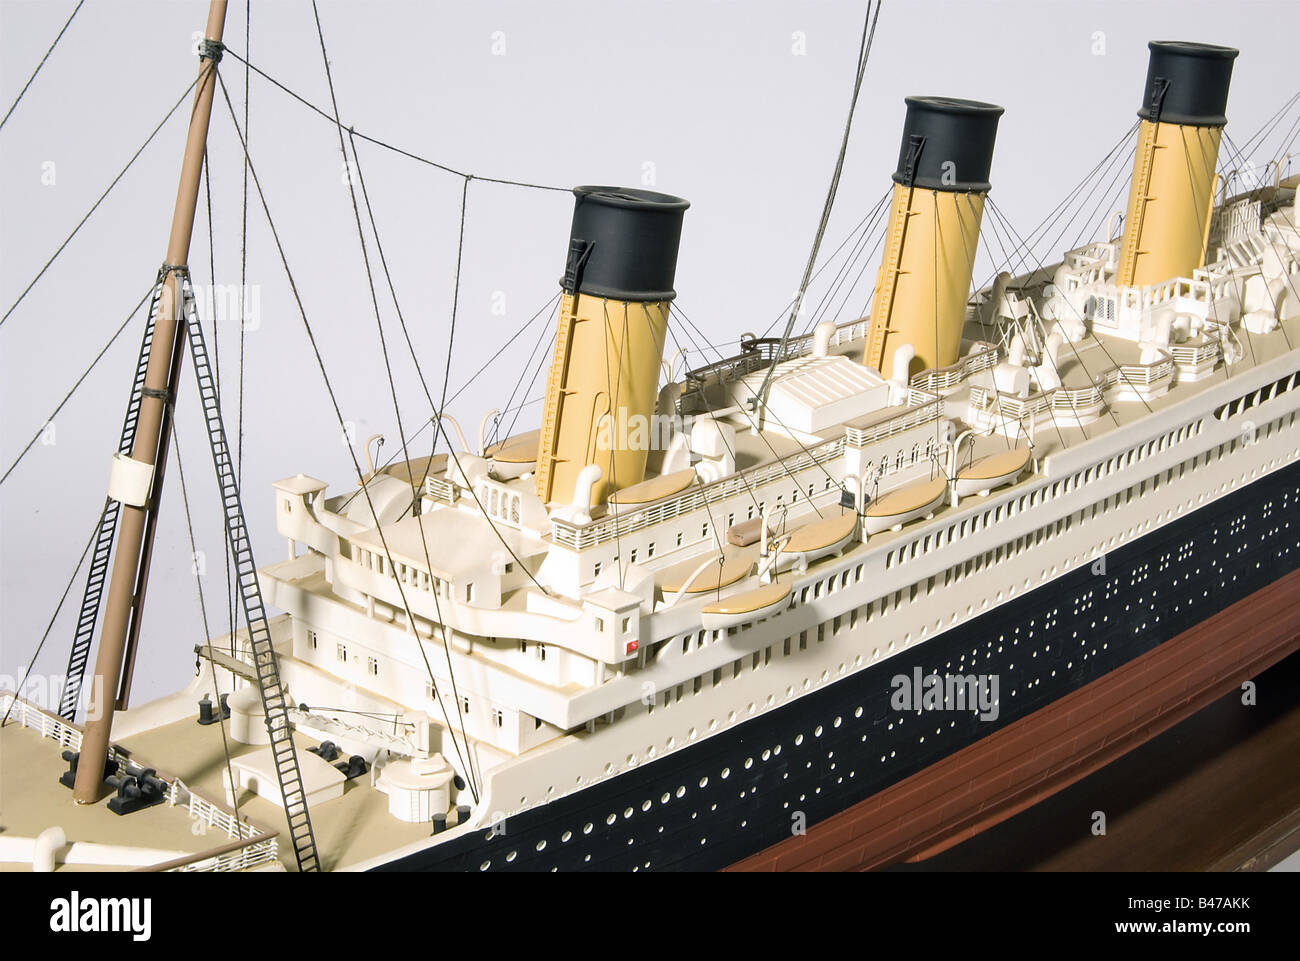 'RMS Titanic', a passenger ship of the White Star Line A highly detailed, fully rigged plastic model on a wooden stand. Length ca. 185 cm. Width 20 cm. Height ca. 65 cm. The keel of the Titanic was laid at Harland & Wolff in Belfast in 1909 and the ship was launched on 31 May 1911. The Titanic, which was considered unsinkable, became famous for its collision with an iceberg during the night of 14 to 15 April and its subsequent loss with 1504 of the 2208 people on board. historic, historical, 1900s, 1910s, 20th century, transport, transportation, object, objects, Stock Photo